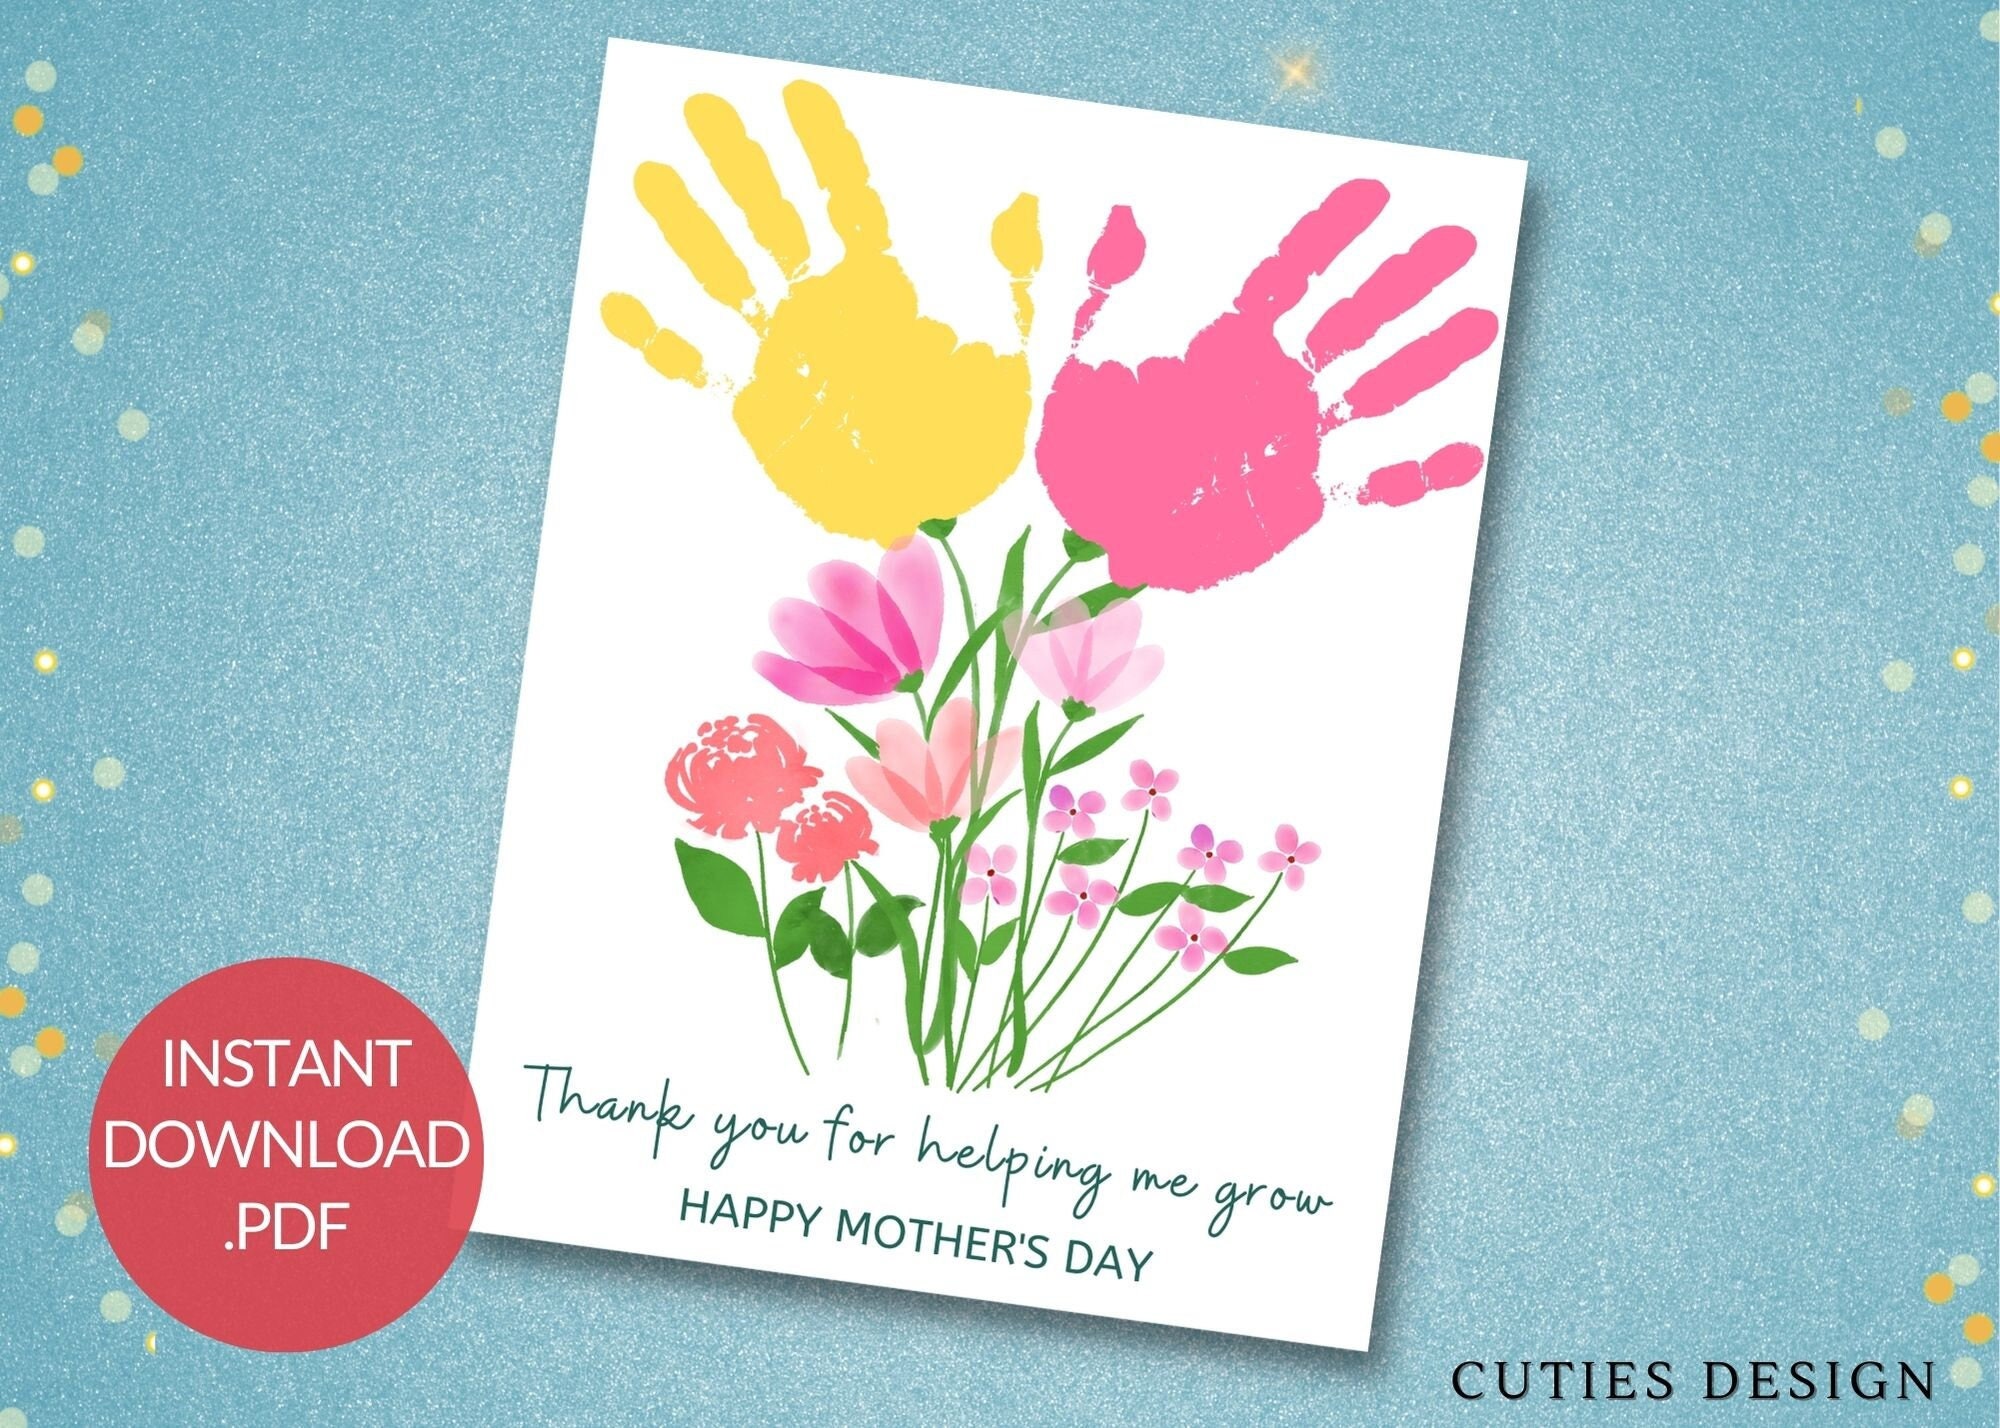 Mother's Day Finger Paint Art Printable Balloons and Bicycle DIY Kid's Art  Activity Fingerprints Ink Pad Interactive 8x10 in Art Work Print 